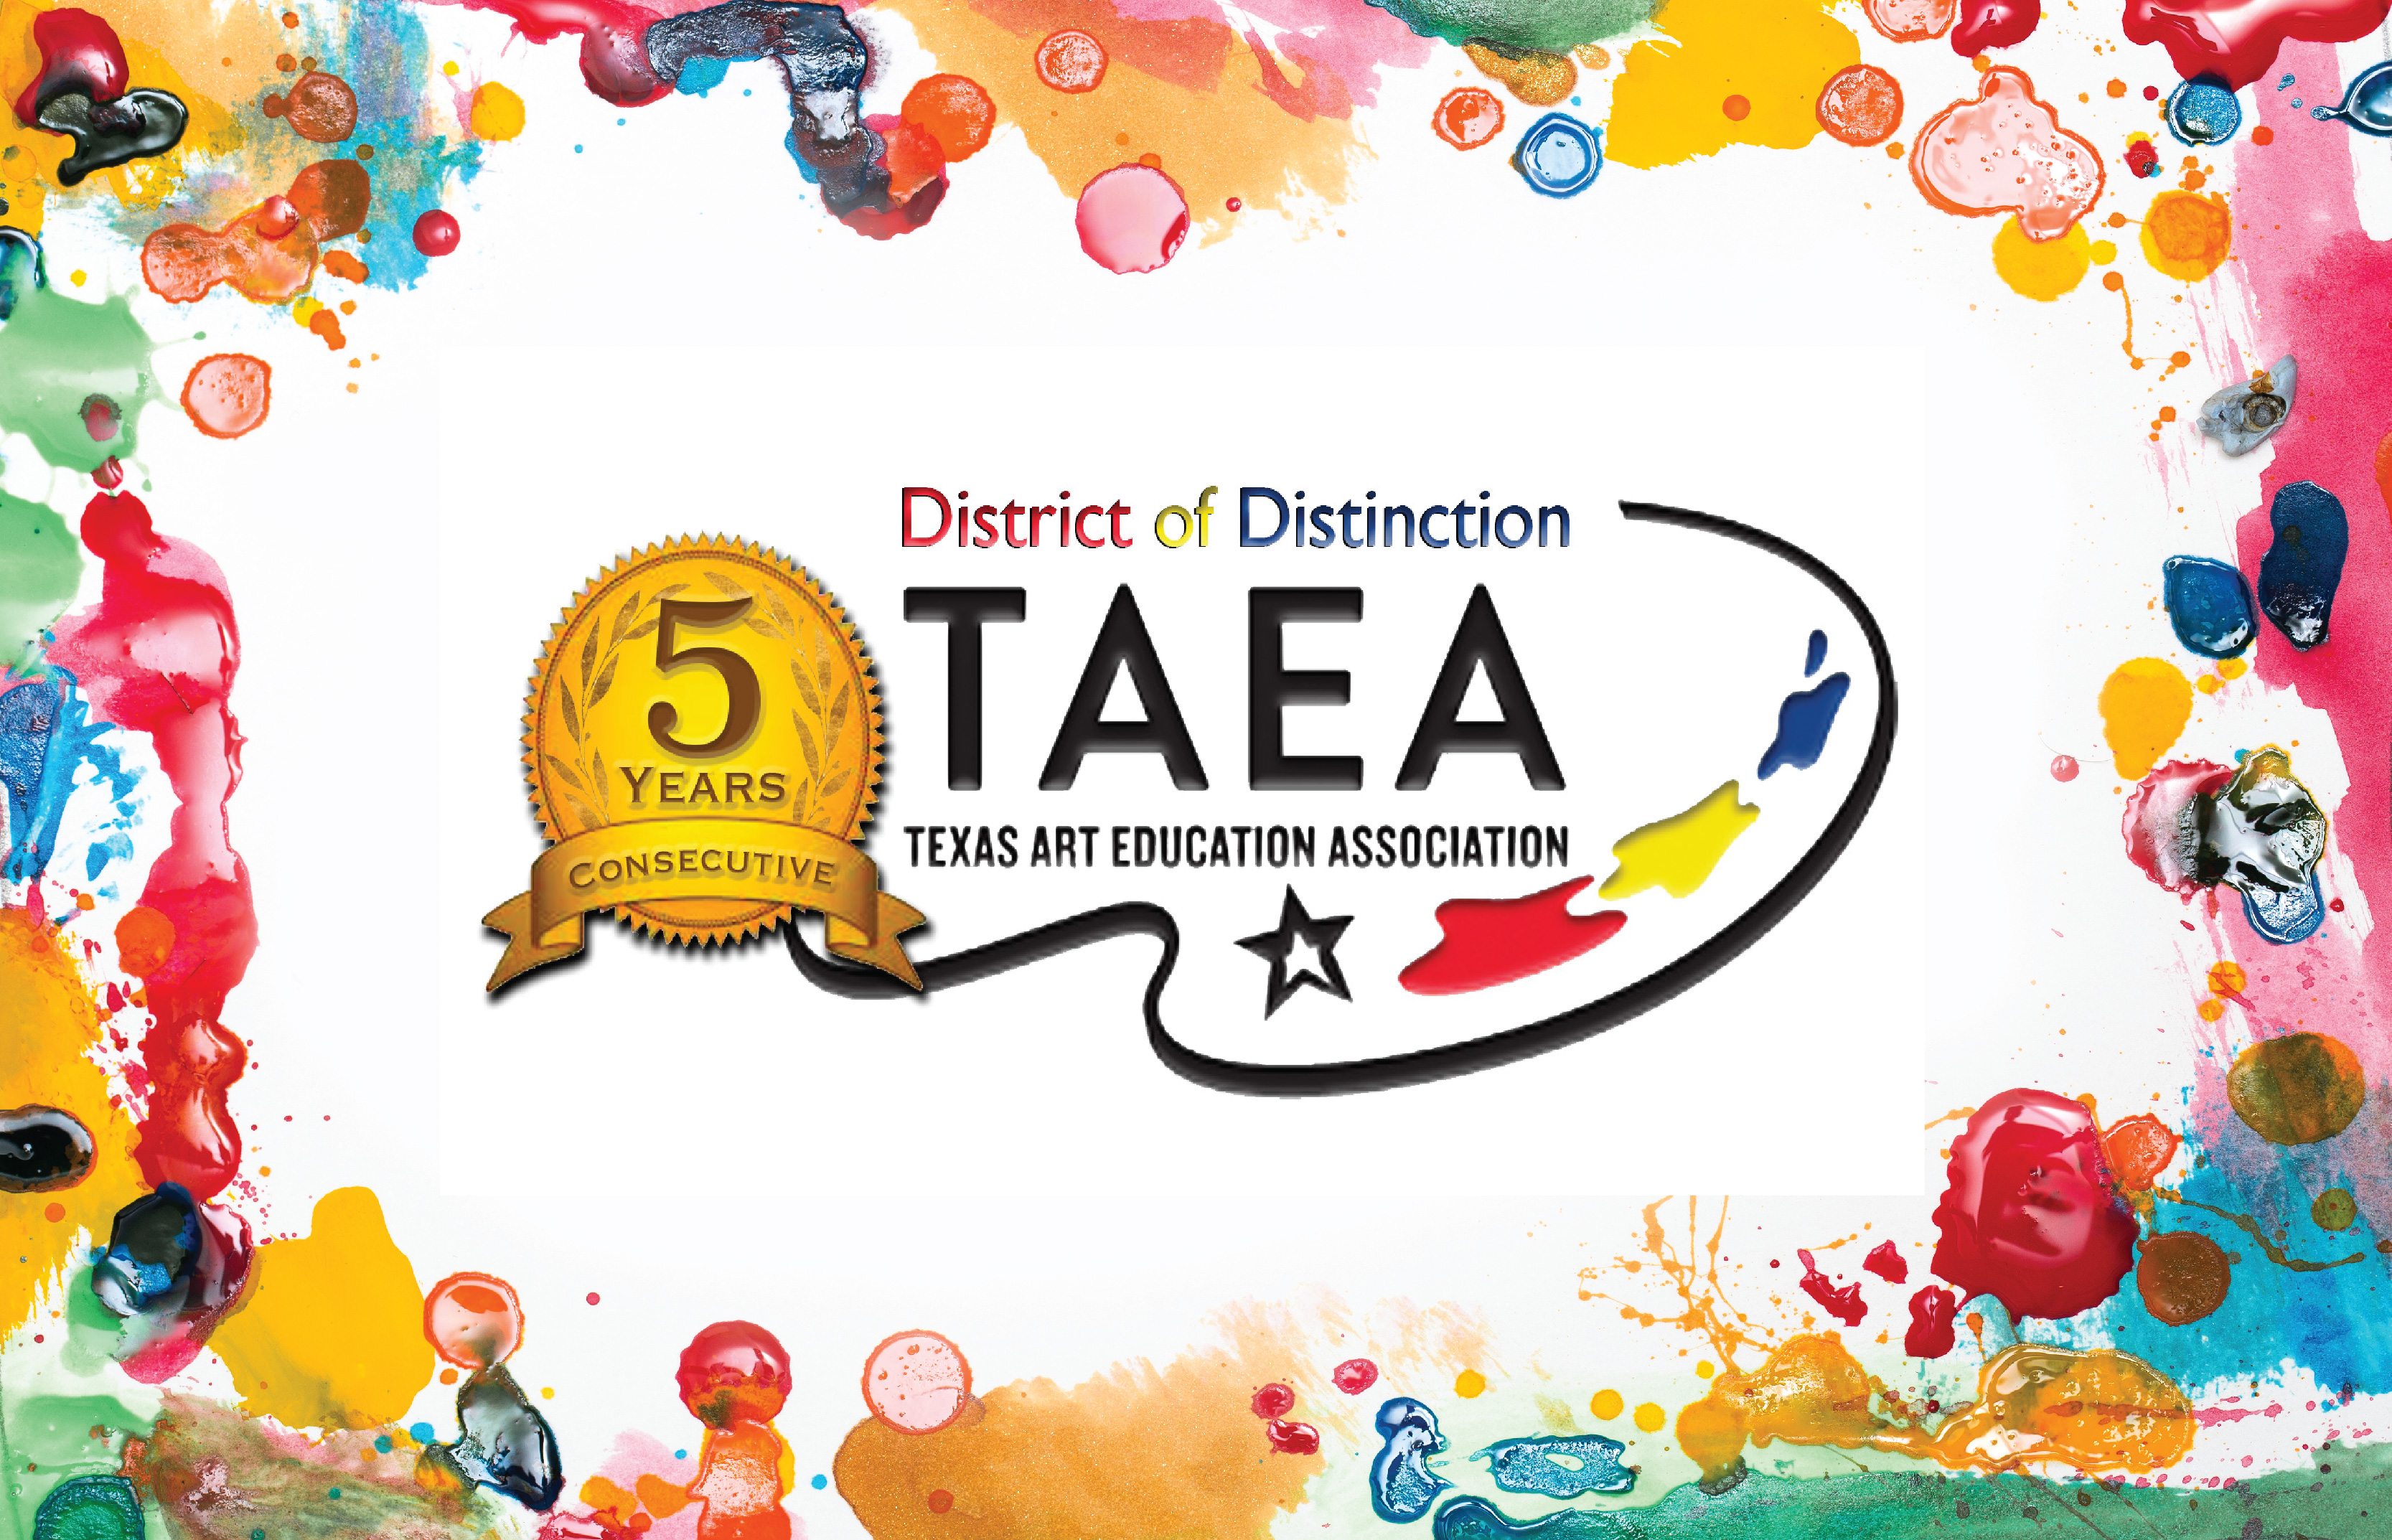 Texas Art Education Association Names Spring ISD a 'District of Distinction' for Fifth Consecutive Year